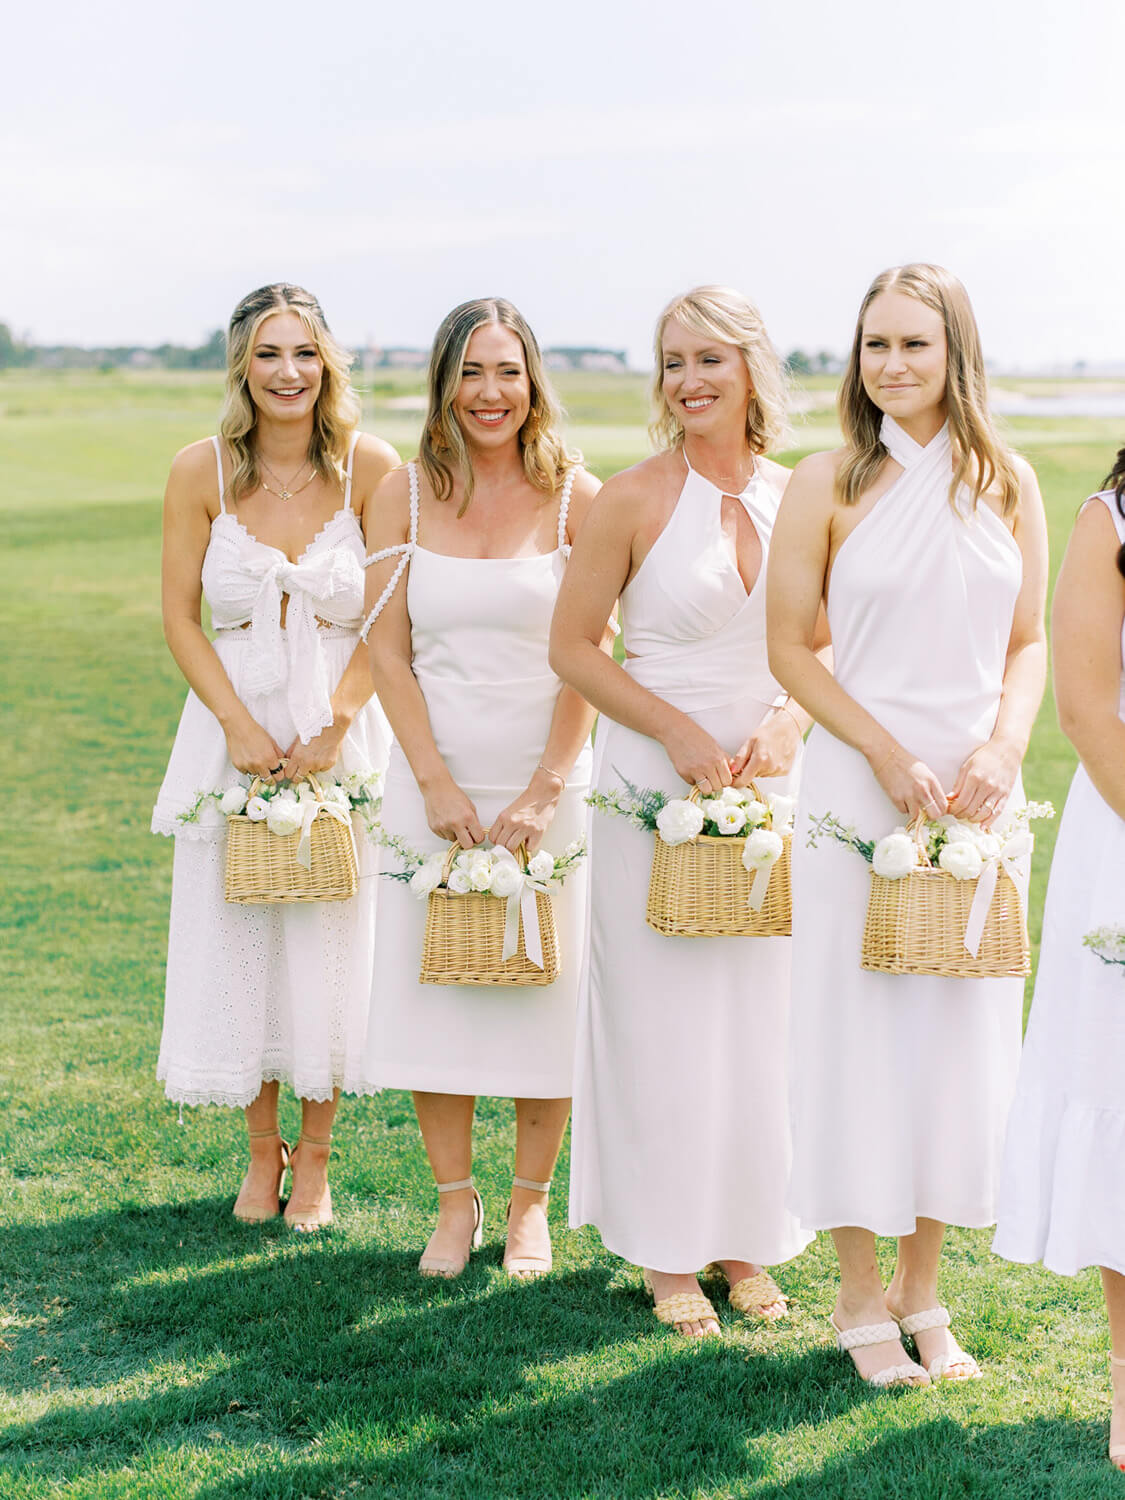 all white bridesmaids dresses with baskets of flowers